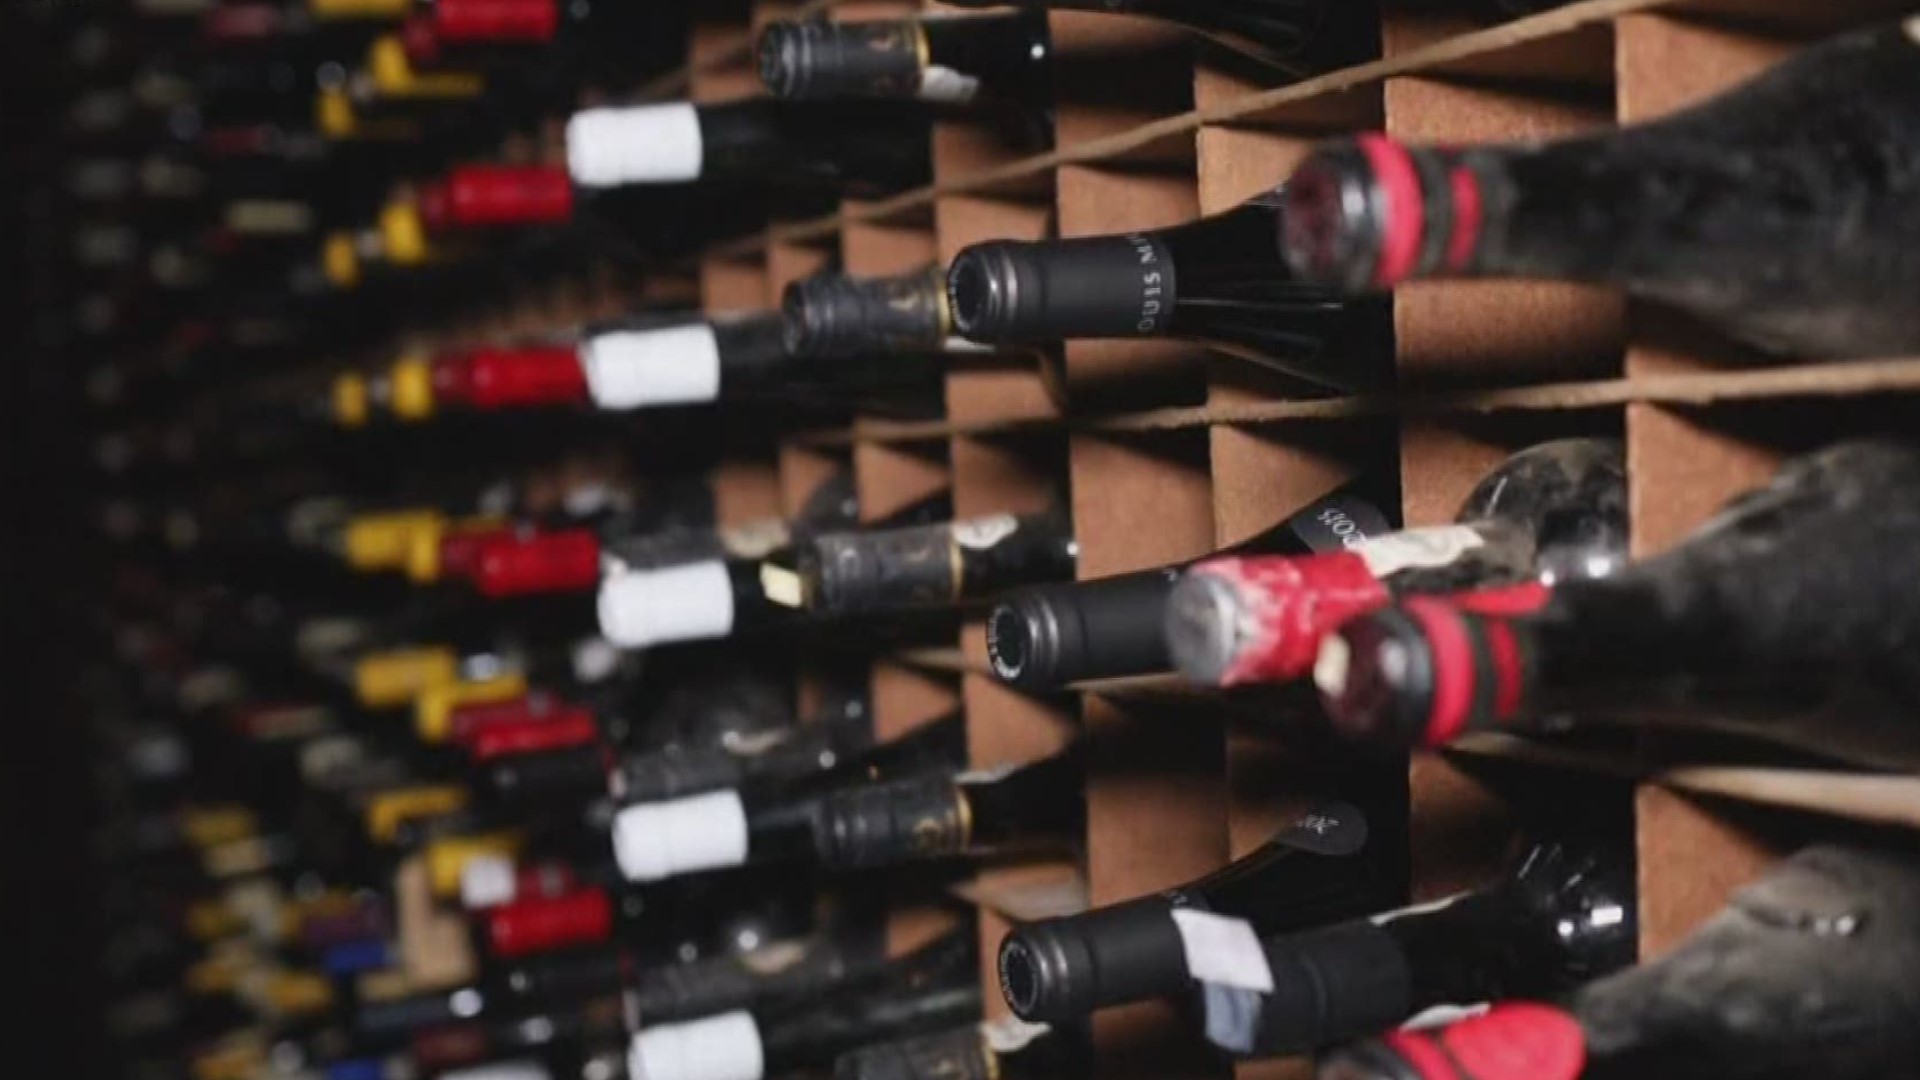 10News reporter Candice Aviles takes us inside the wine cellar at Bern's Steak House.